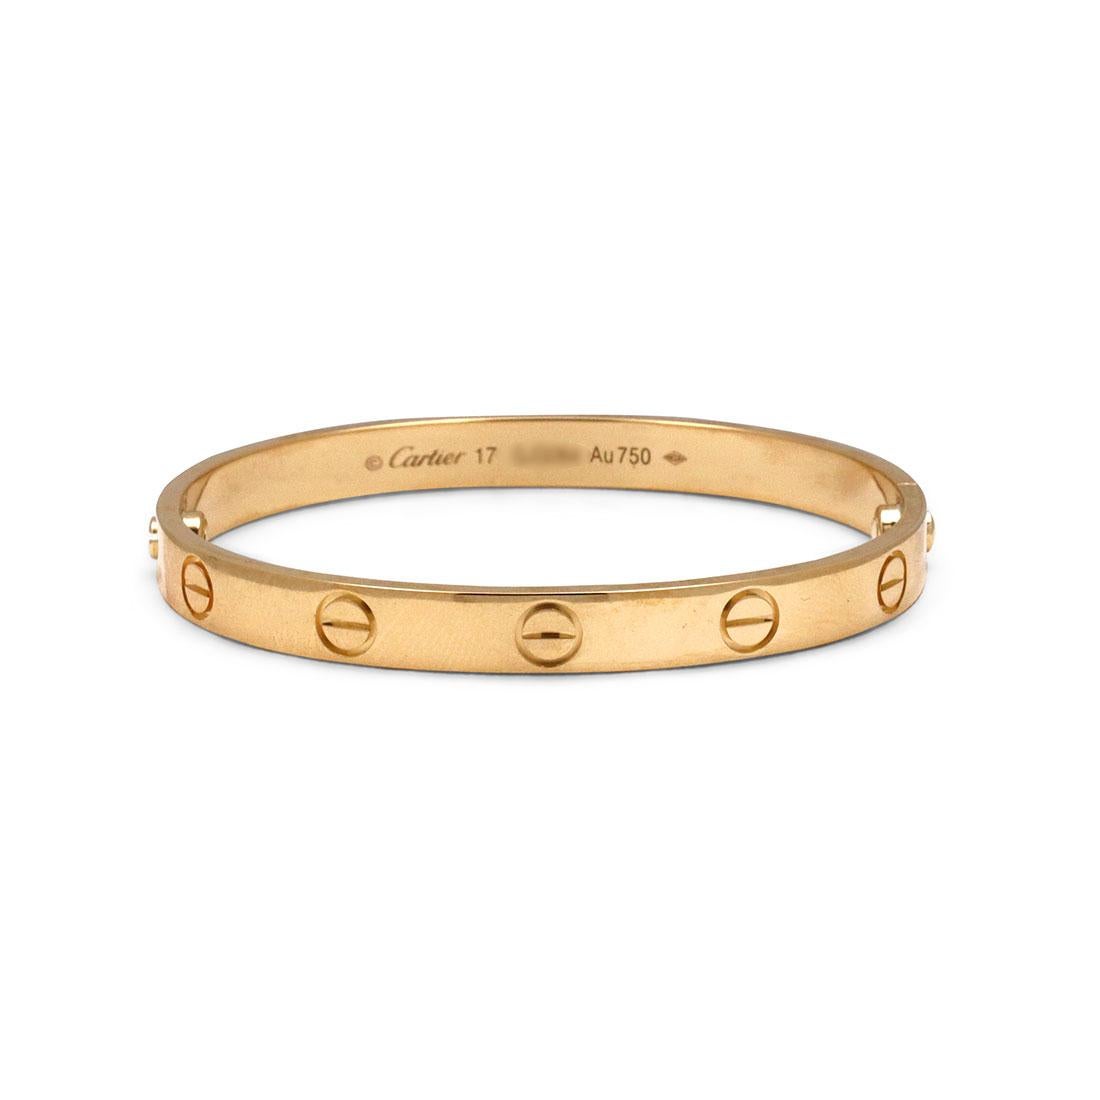 Authentic Cartier 'Love' bracelet crafted in 18 karat yellow gold. Size 17. Signed Cartier, 17, Au750, with serial number and hallmarks. The bracelet is presented with the original screwdriver, papers, and no box. CIRCA 2010s.

Brand: